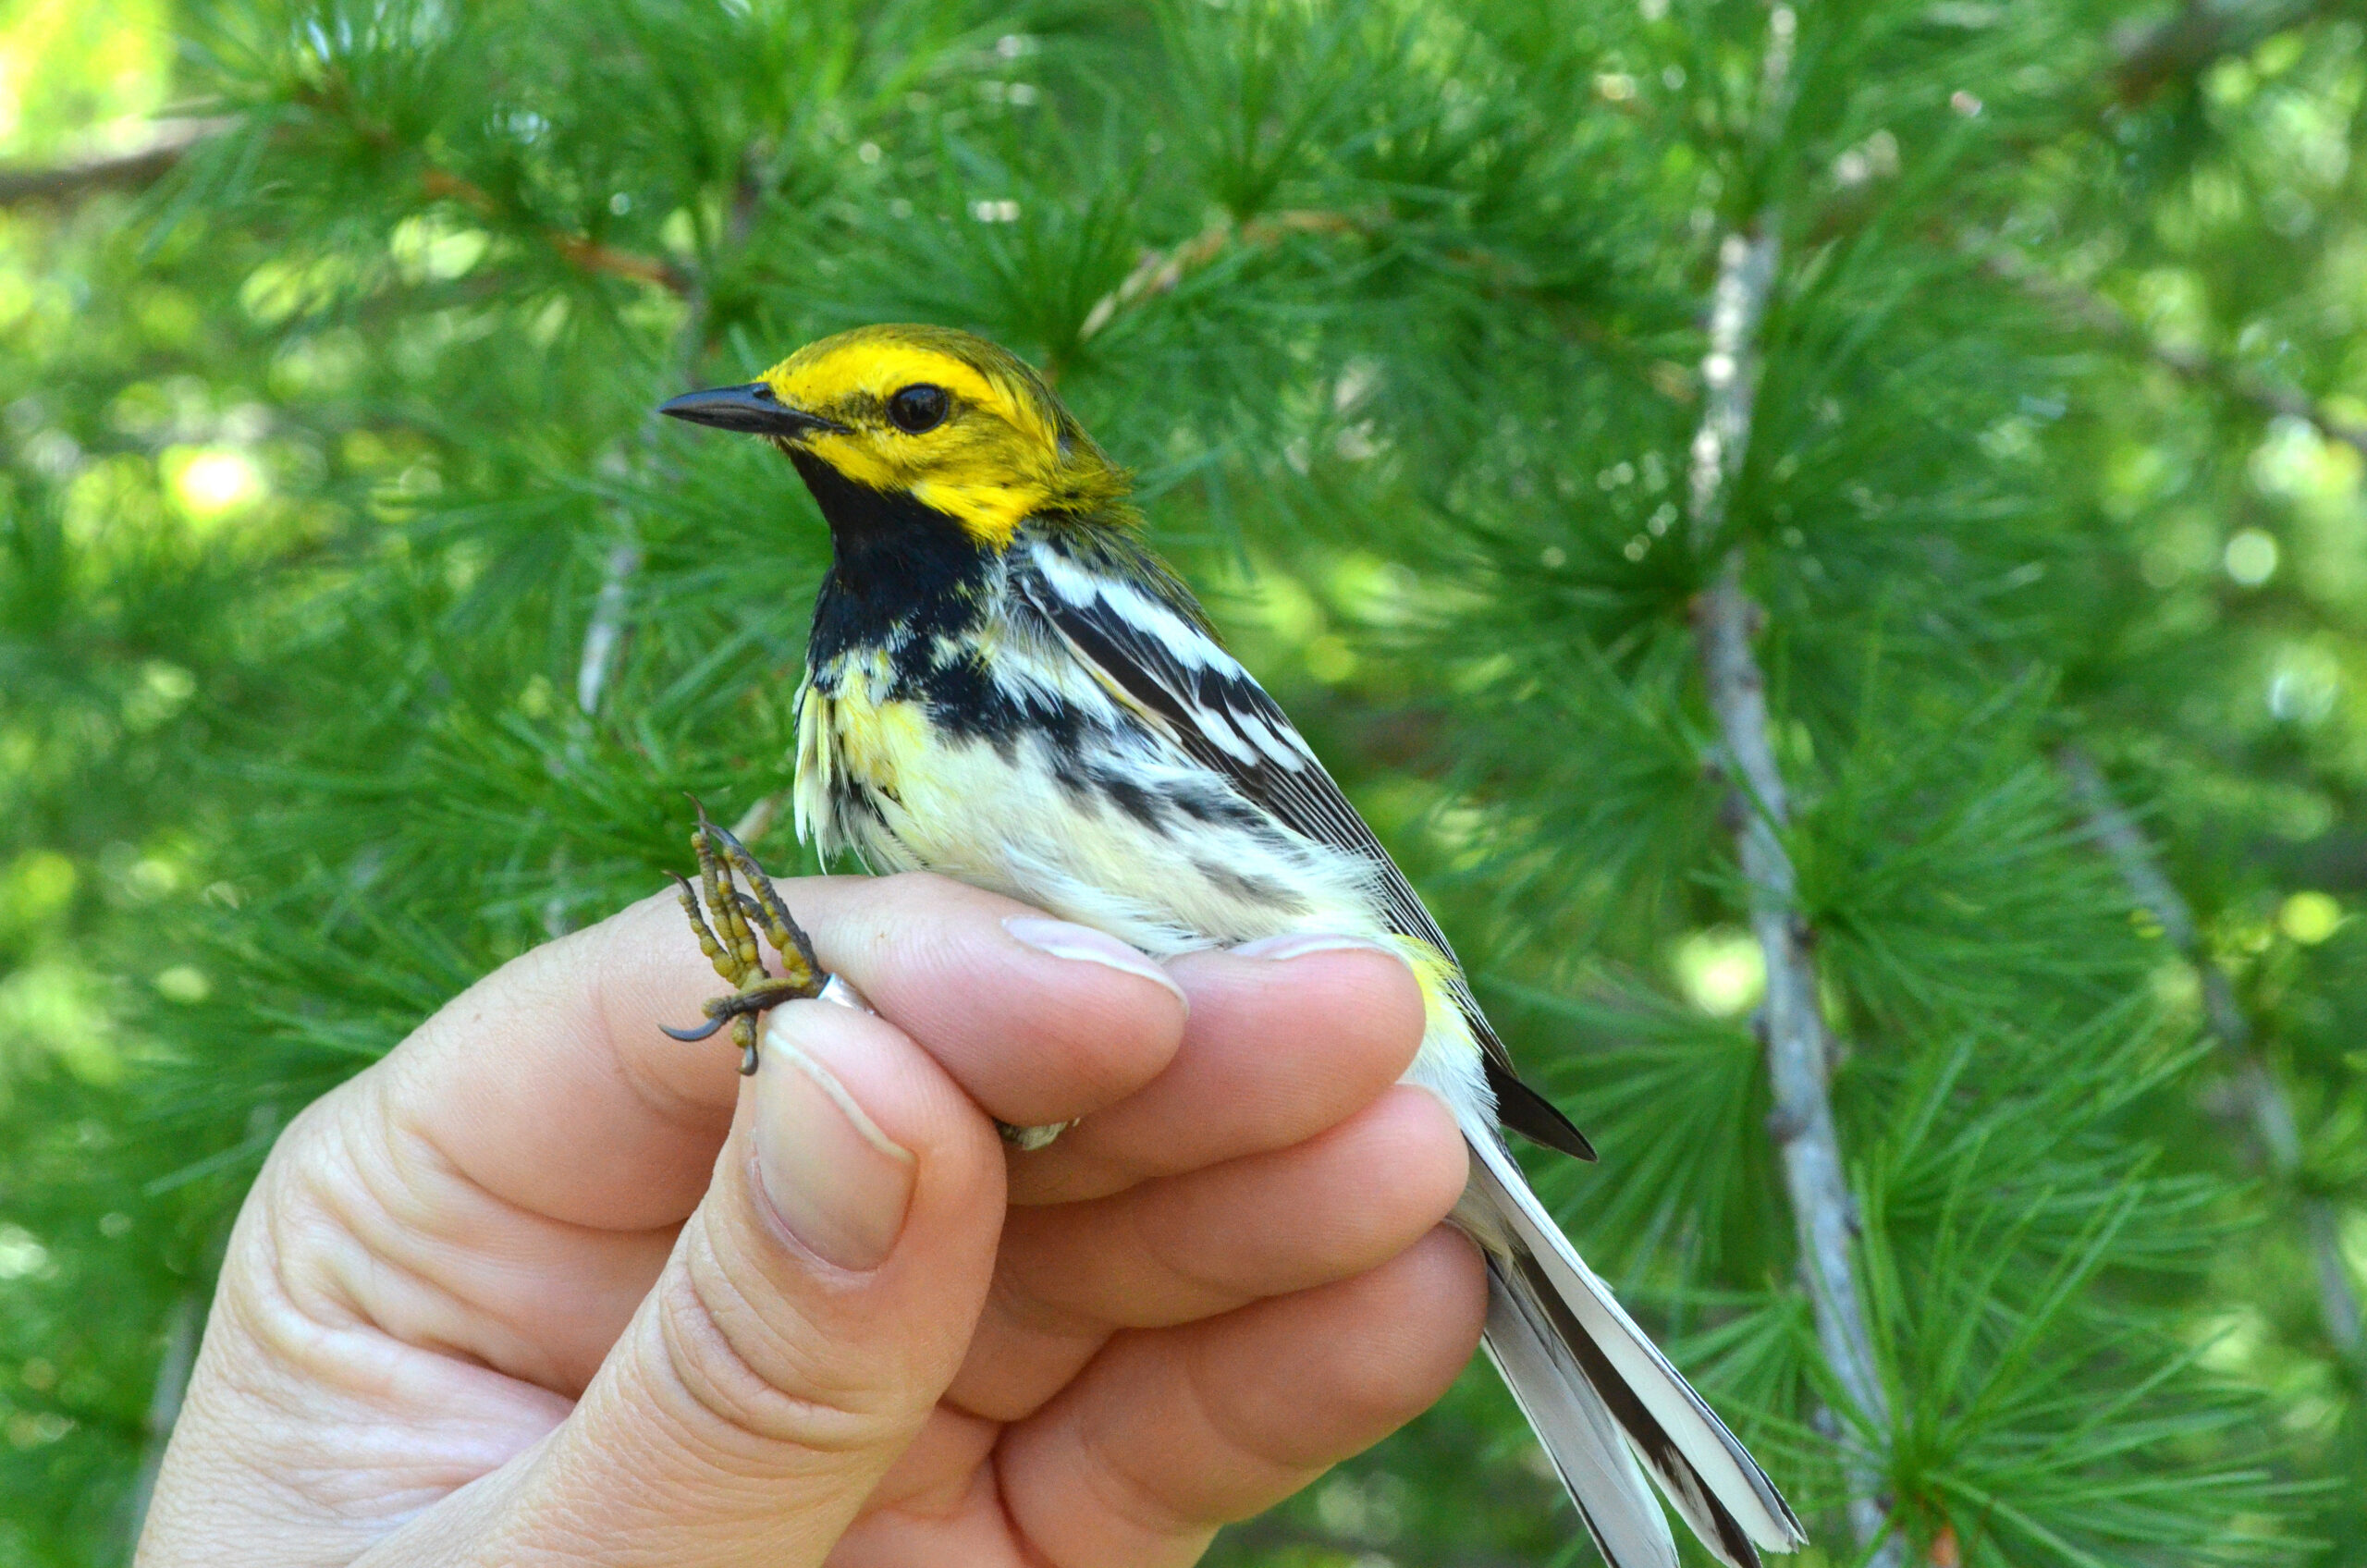 Small Songbird in Hand